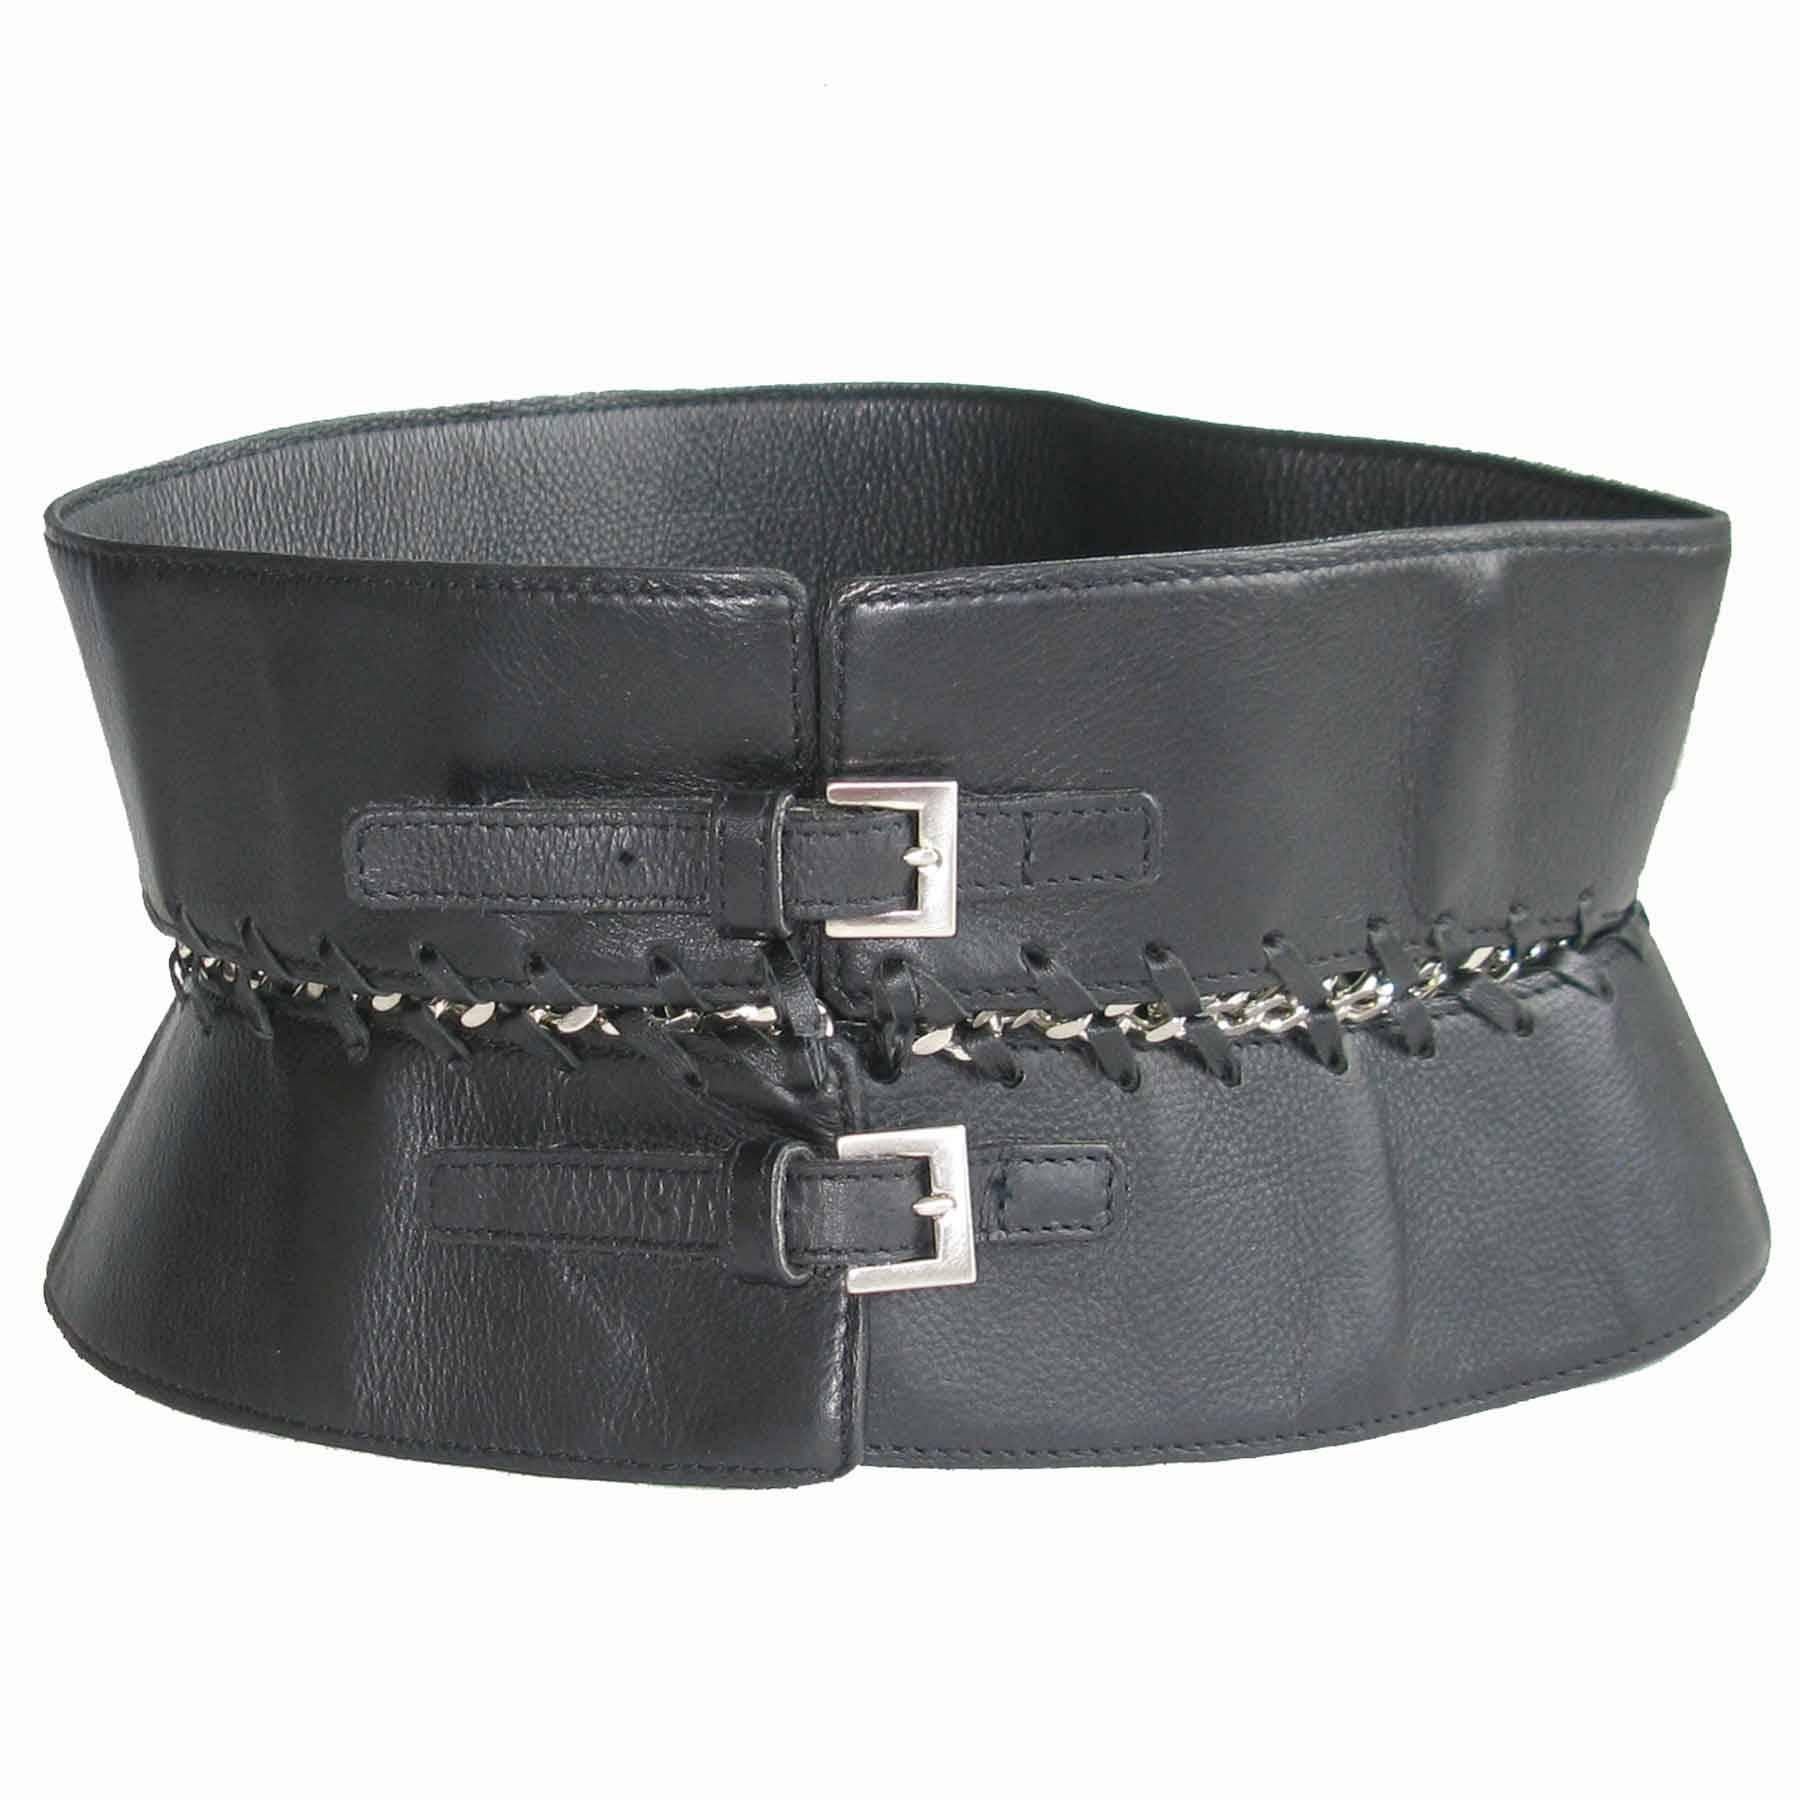 JEAN PAUL GAULTIER Vintage Size75 Belt in Black Leather and Silver Plated Metal